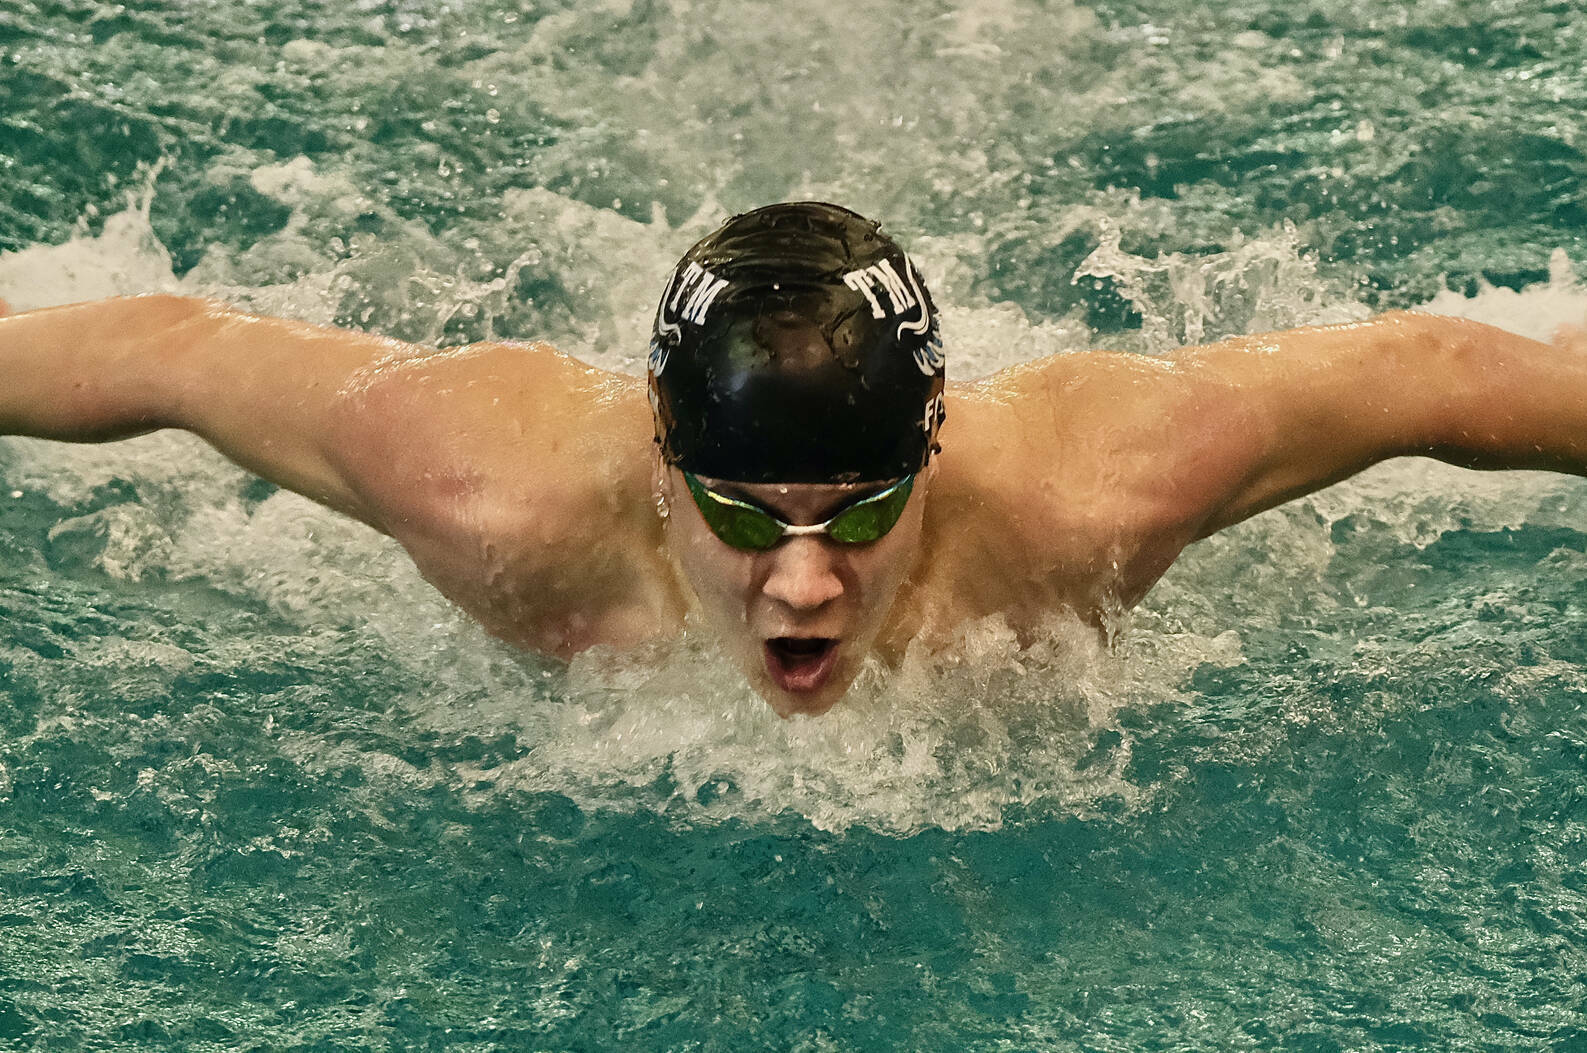 Juneau’s PJ Foy, shown winning the 2023 100 yard butterfly in 48.27 for Thunder Mountain High School during the ASAA state championships at the Dimond Park Aquatics Center on Nov. 4, 2023, qualified for the 2024 June Olympic Team Trials by swimming a 100 long course meters butterfly in a personal best 53.44 on March 16, 2024, at the Speedo Sectionals in Federal Way, Washington. (Klas Stolpe / Juneau Empire file photo)